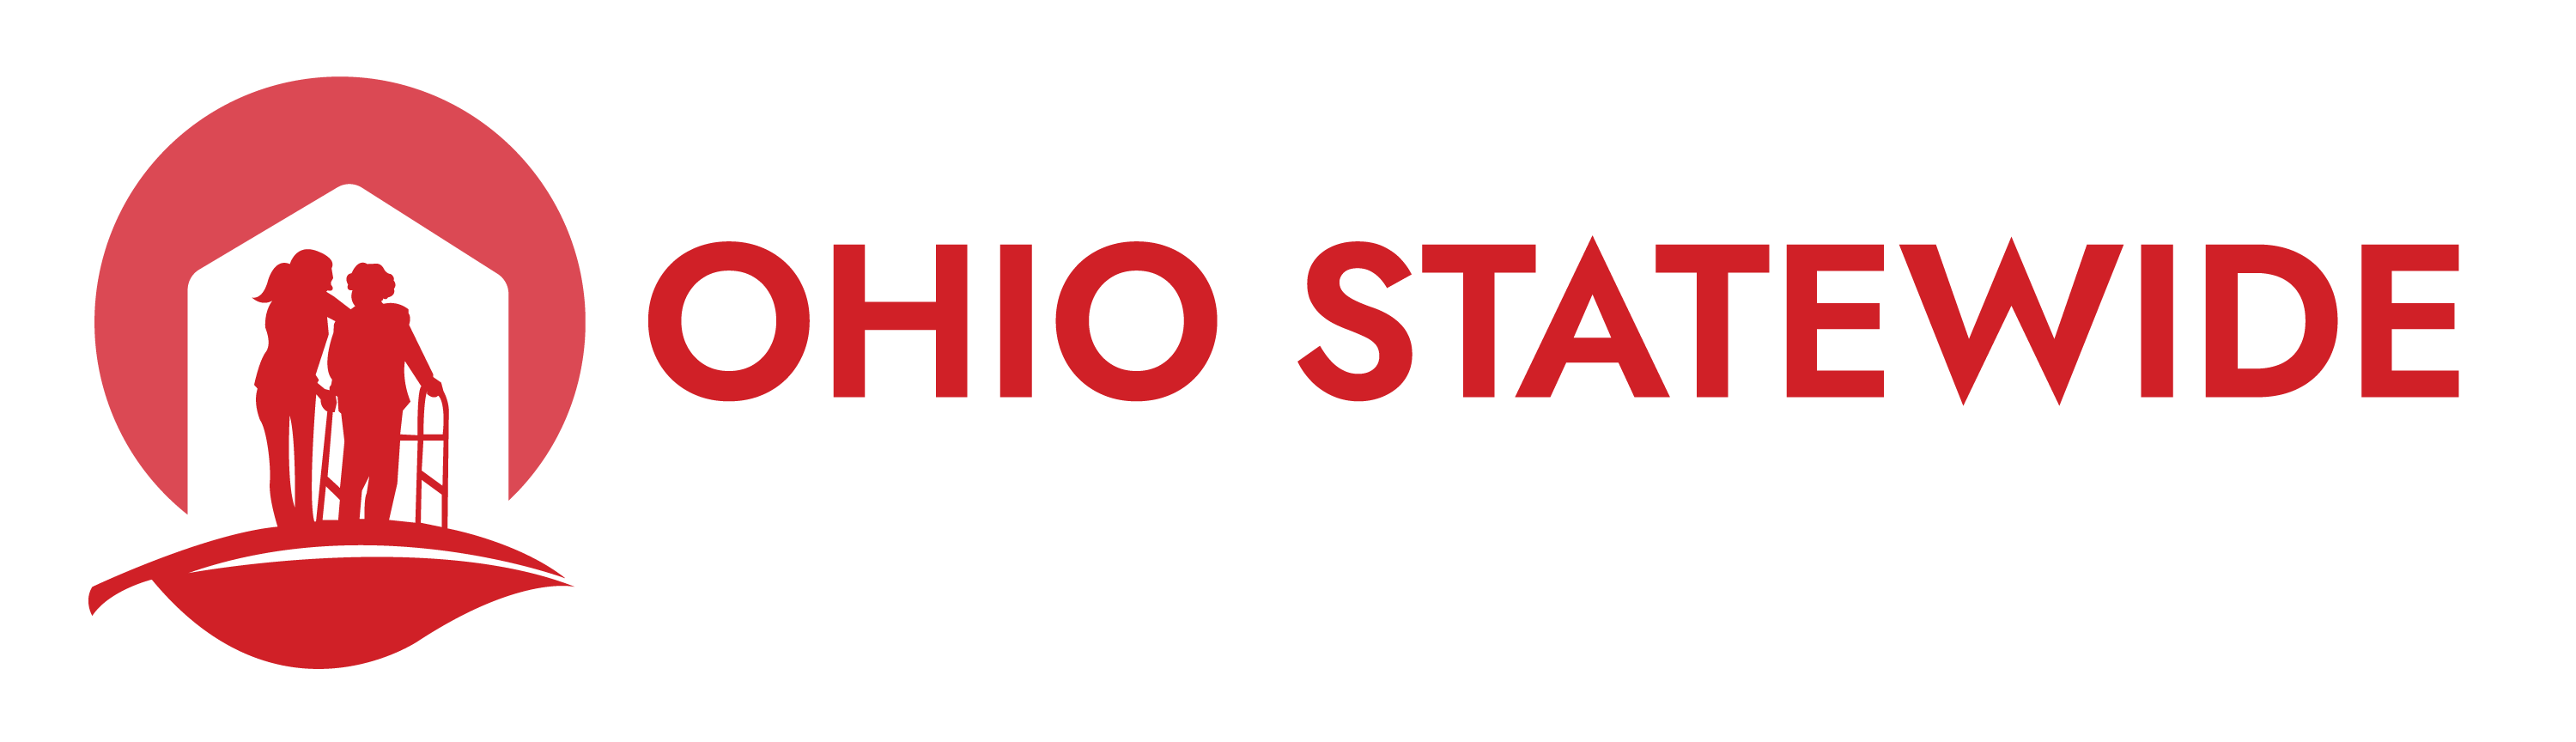 Rediscover Hobbies in Retirement! – OHIO STATEWIDE OLDER ADULT ADVISORS